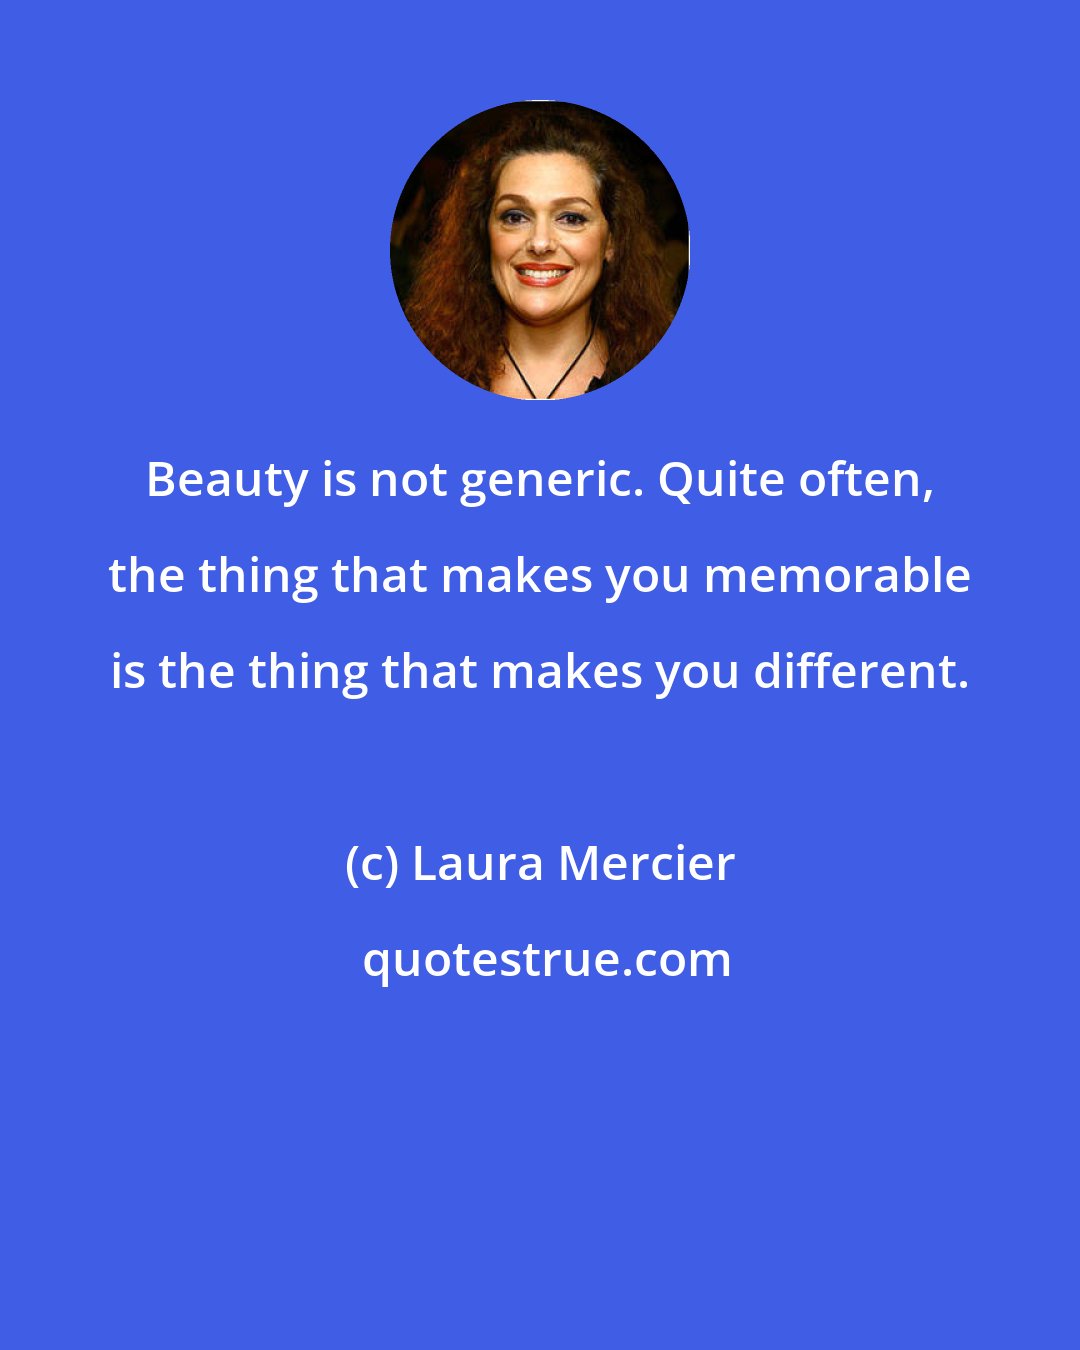 Laura Mercier: Beauty is not generic. Quite often, the thing that makes you memorable is the thing that makes you different.